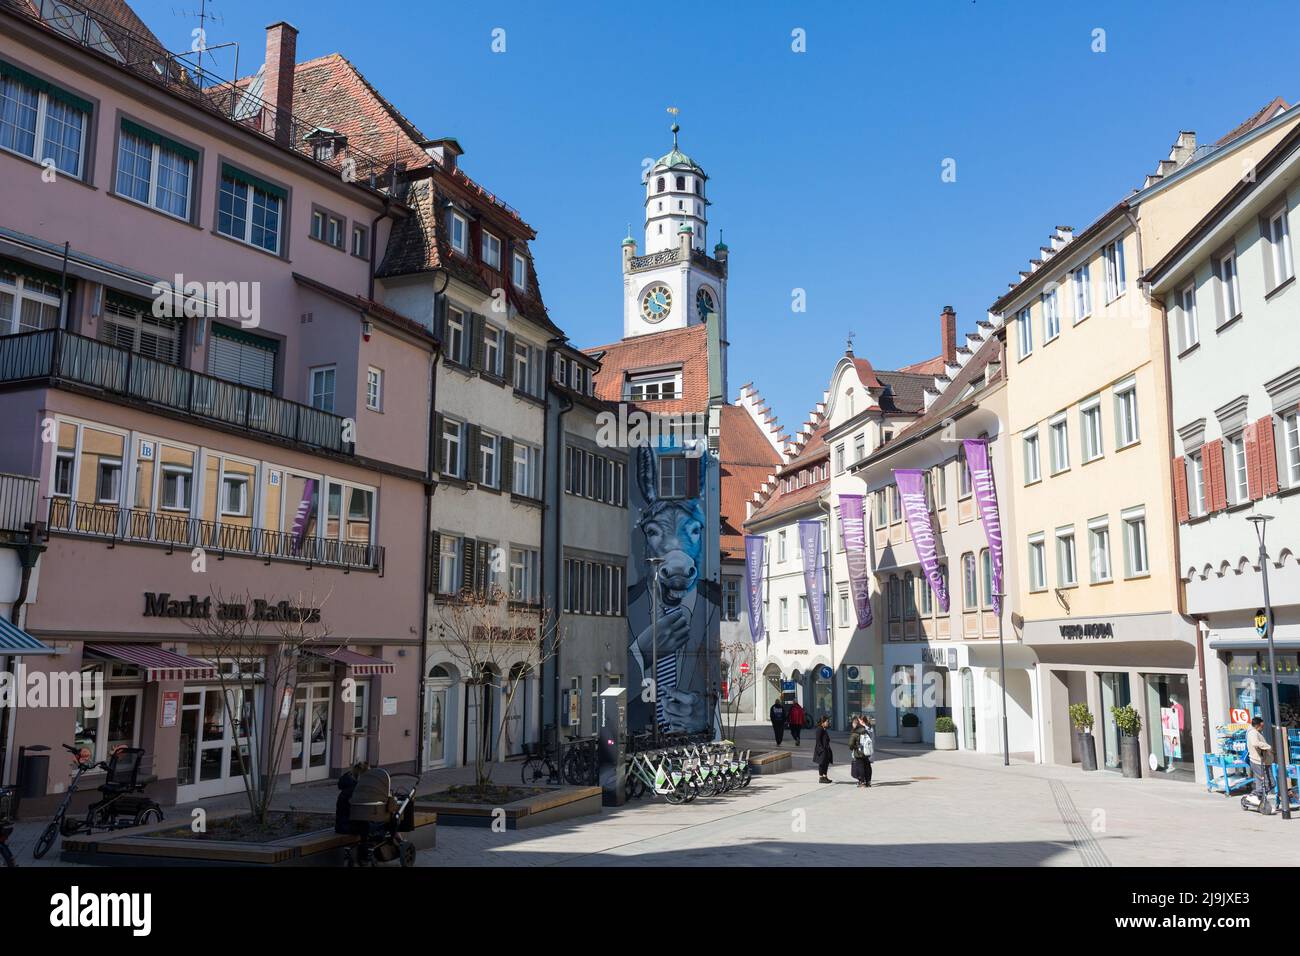 Ravensburg, Germany - Mar 23, 2022: Pedestrian zone in the city center of Ravensburg. The tower in the background is called Blaserturm. Stock Photo